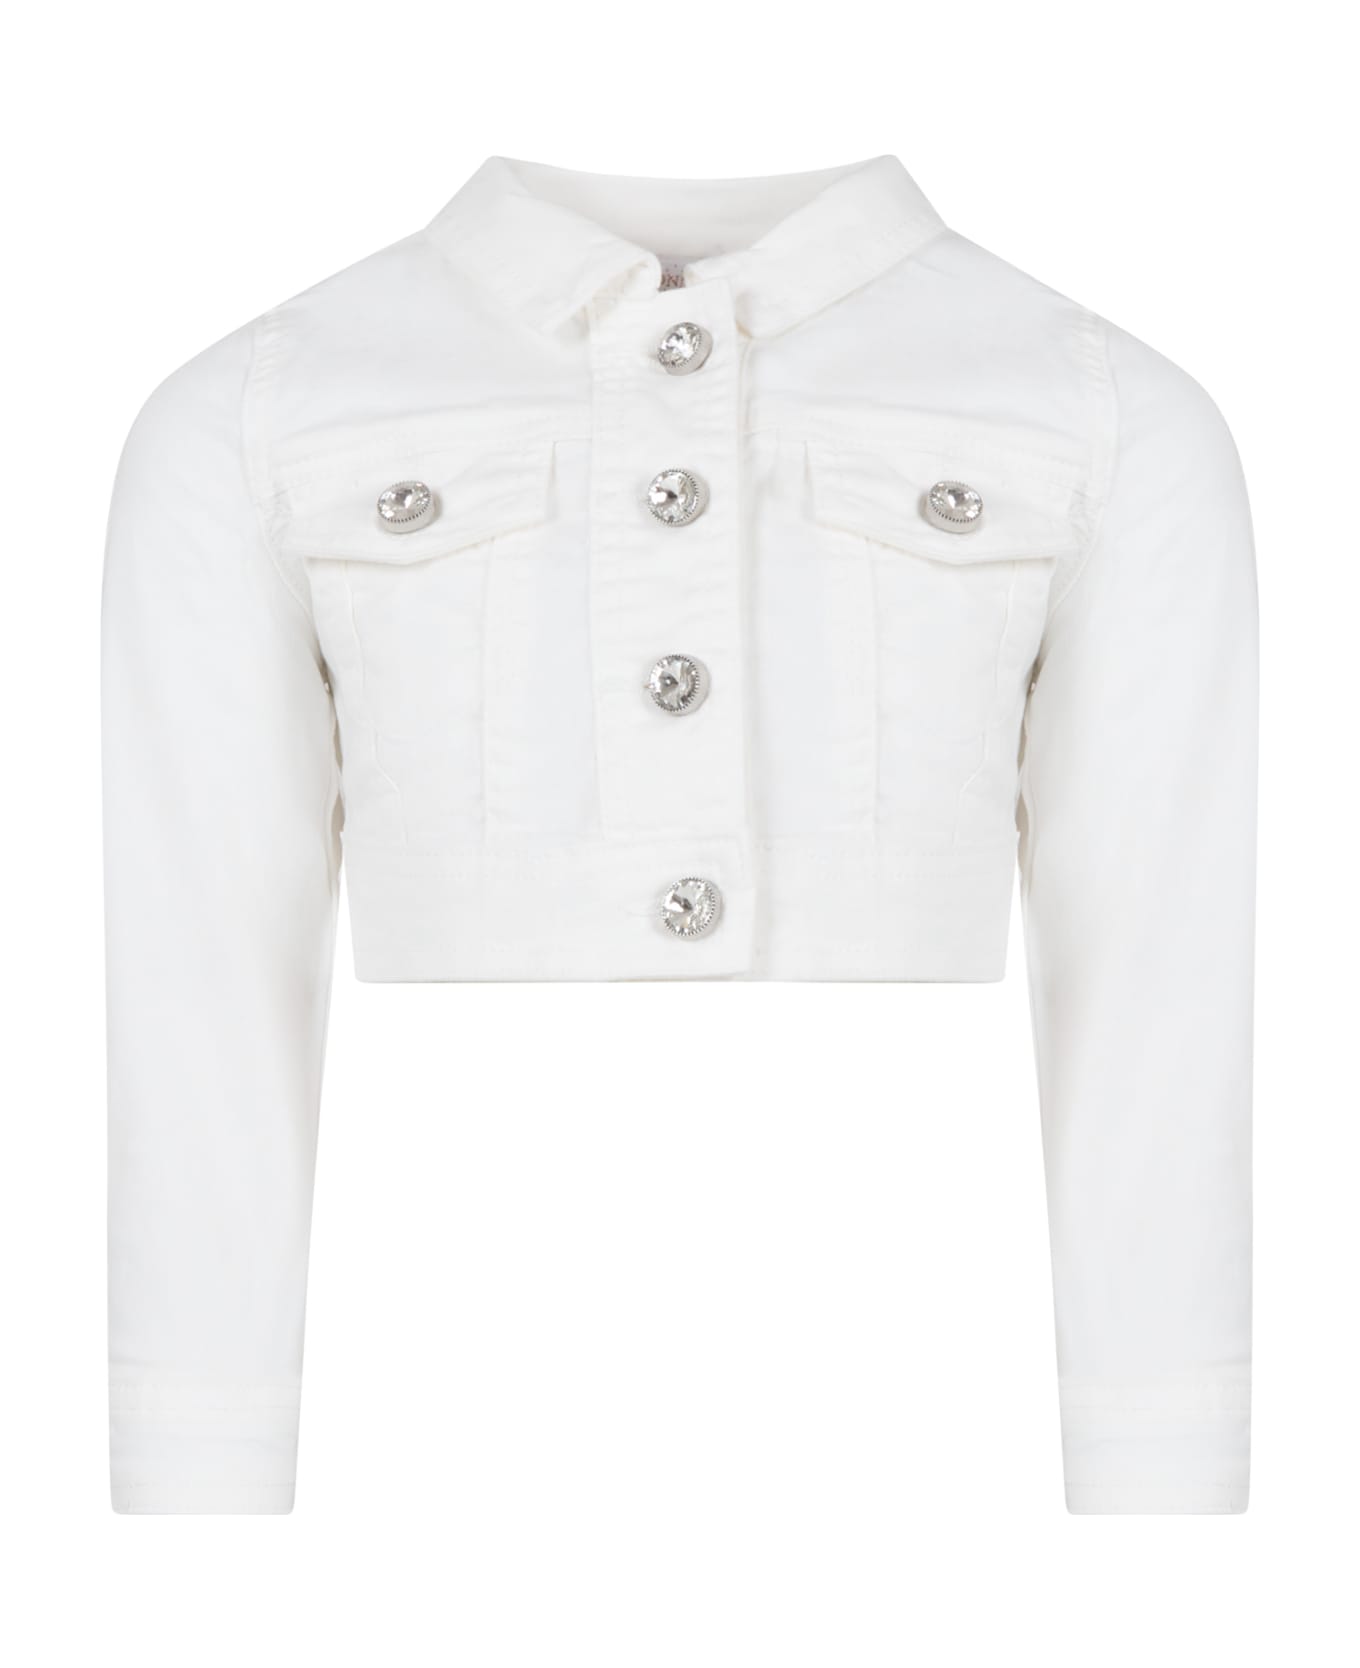 Monnalisa White Jacket For Girl With Jewel Buttons - White